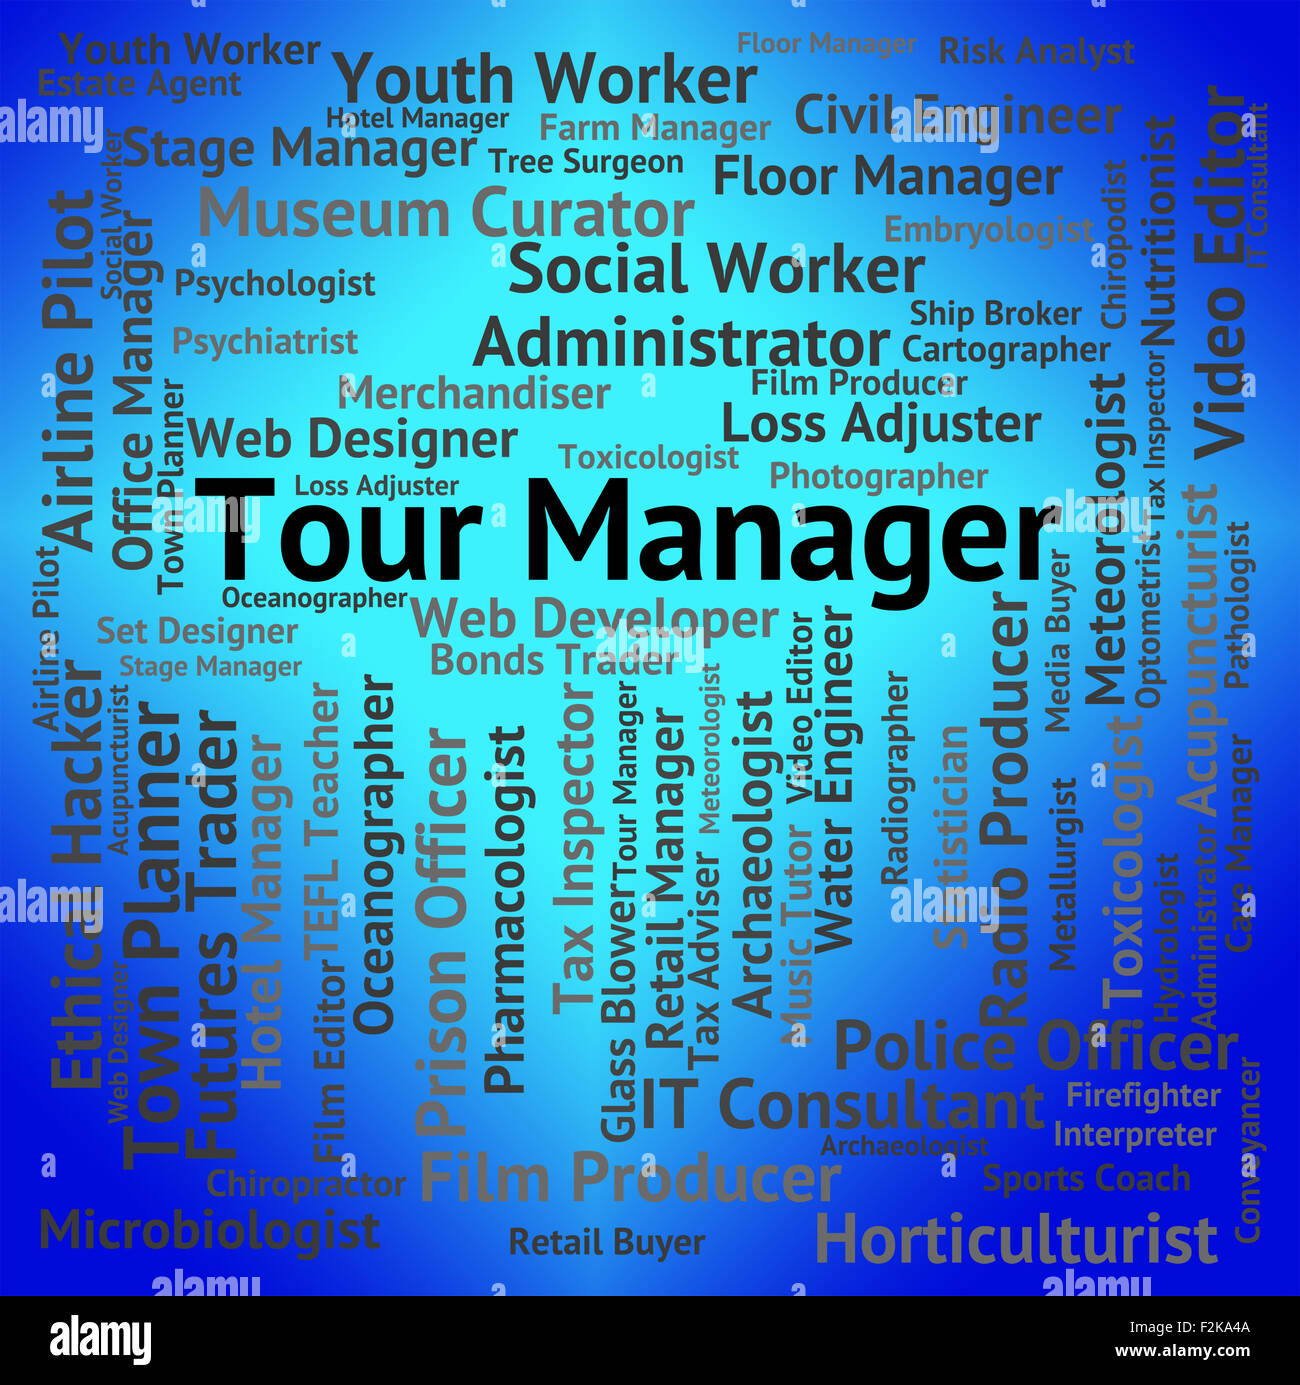 Tour Manager Videos